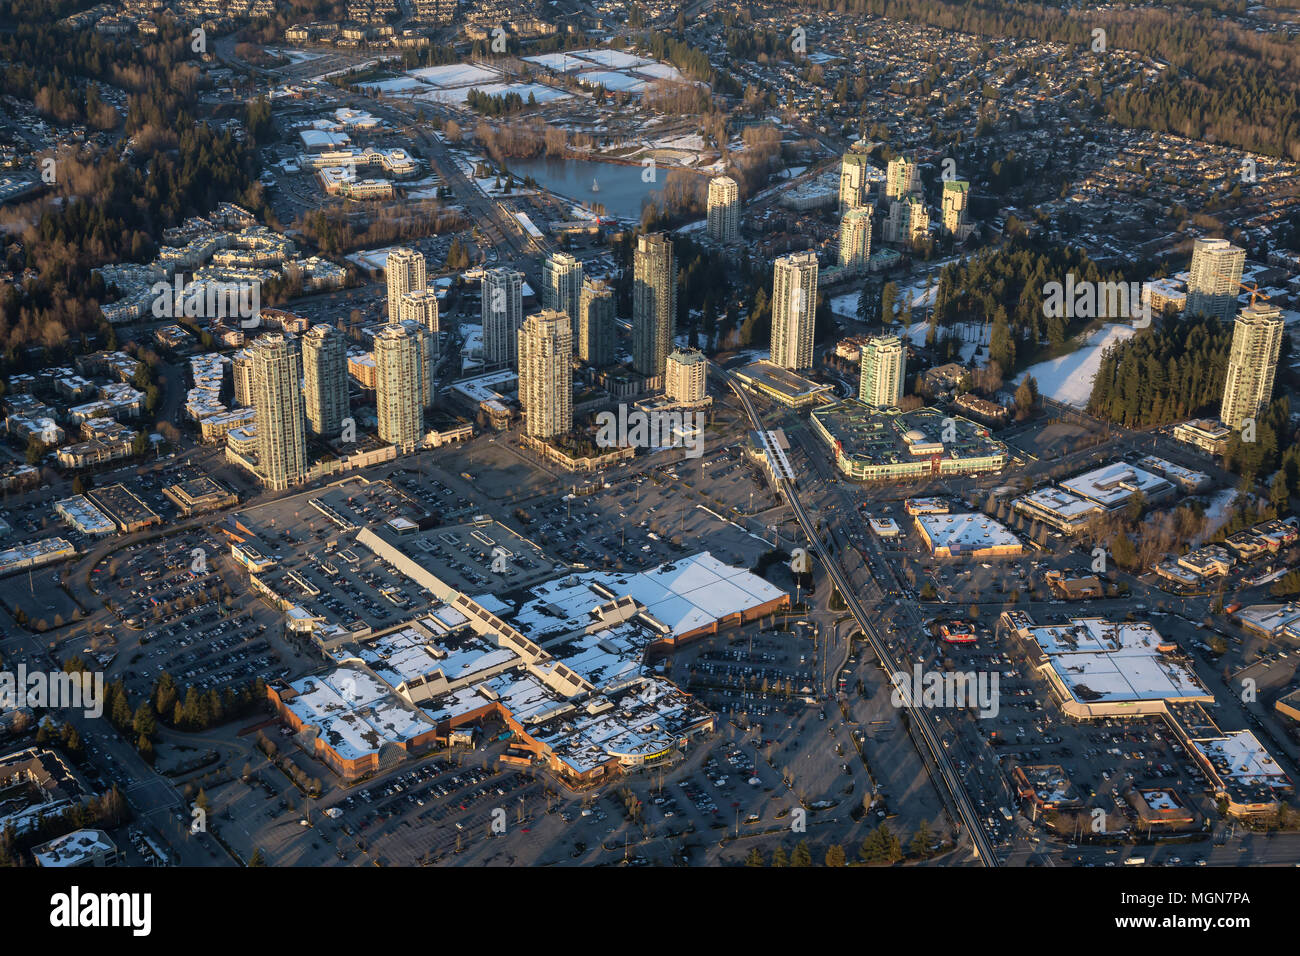 Vancouver, British Columbia, Canada - February 22, 2018: Aerial view of Coquitlam Centre Mall during a vibrant winter sunset. Stock Photo